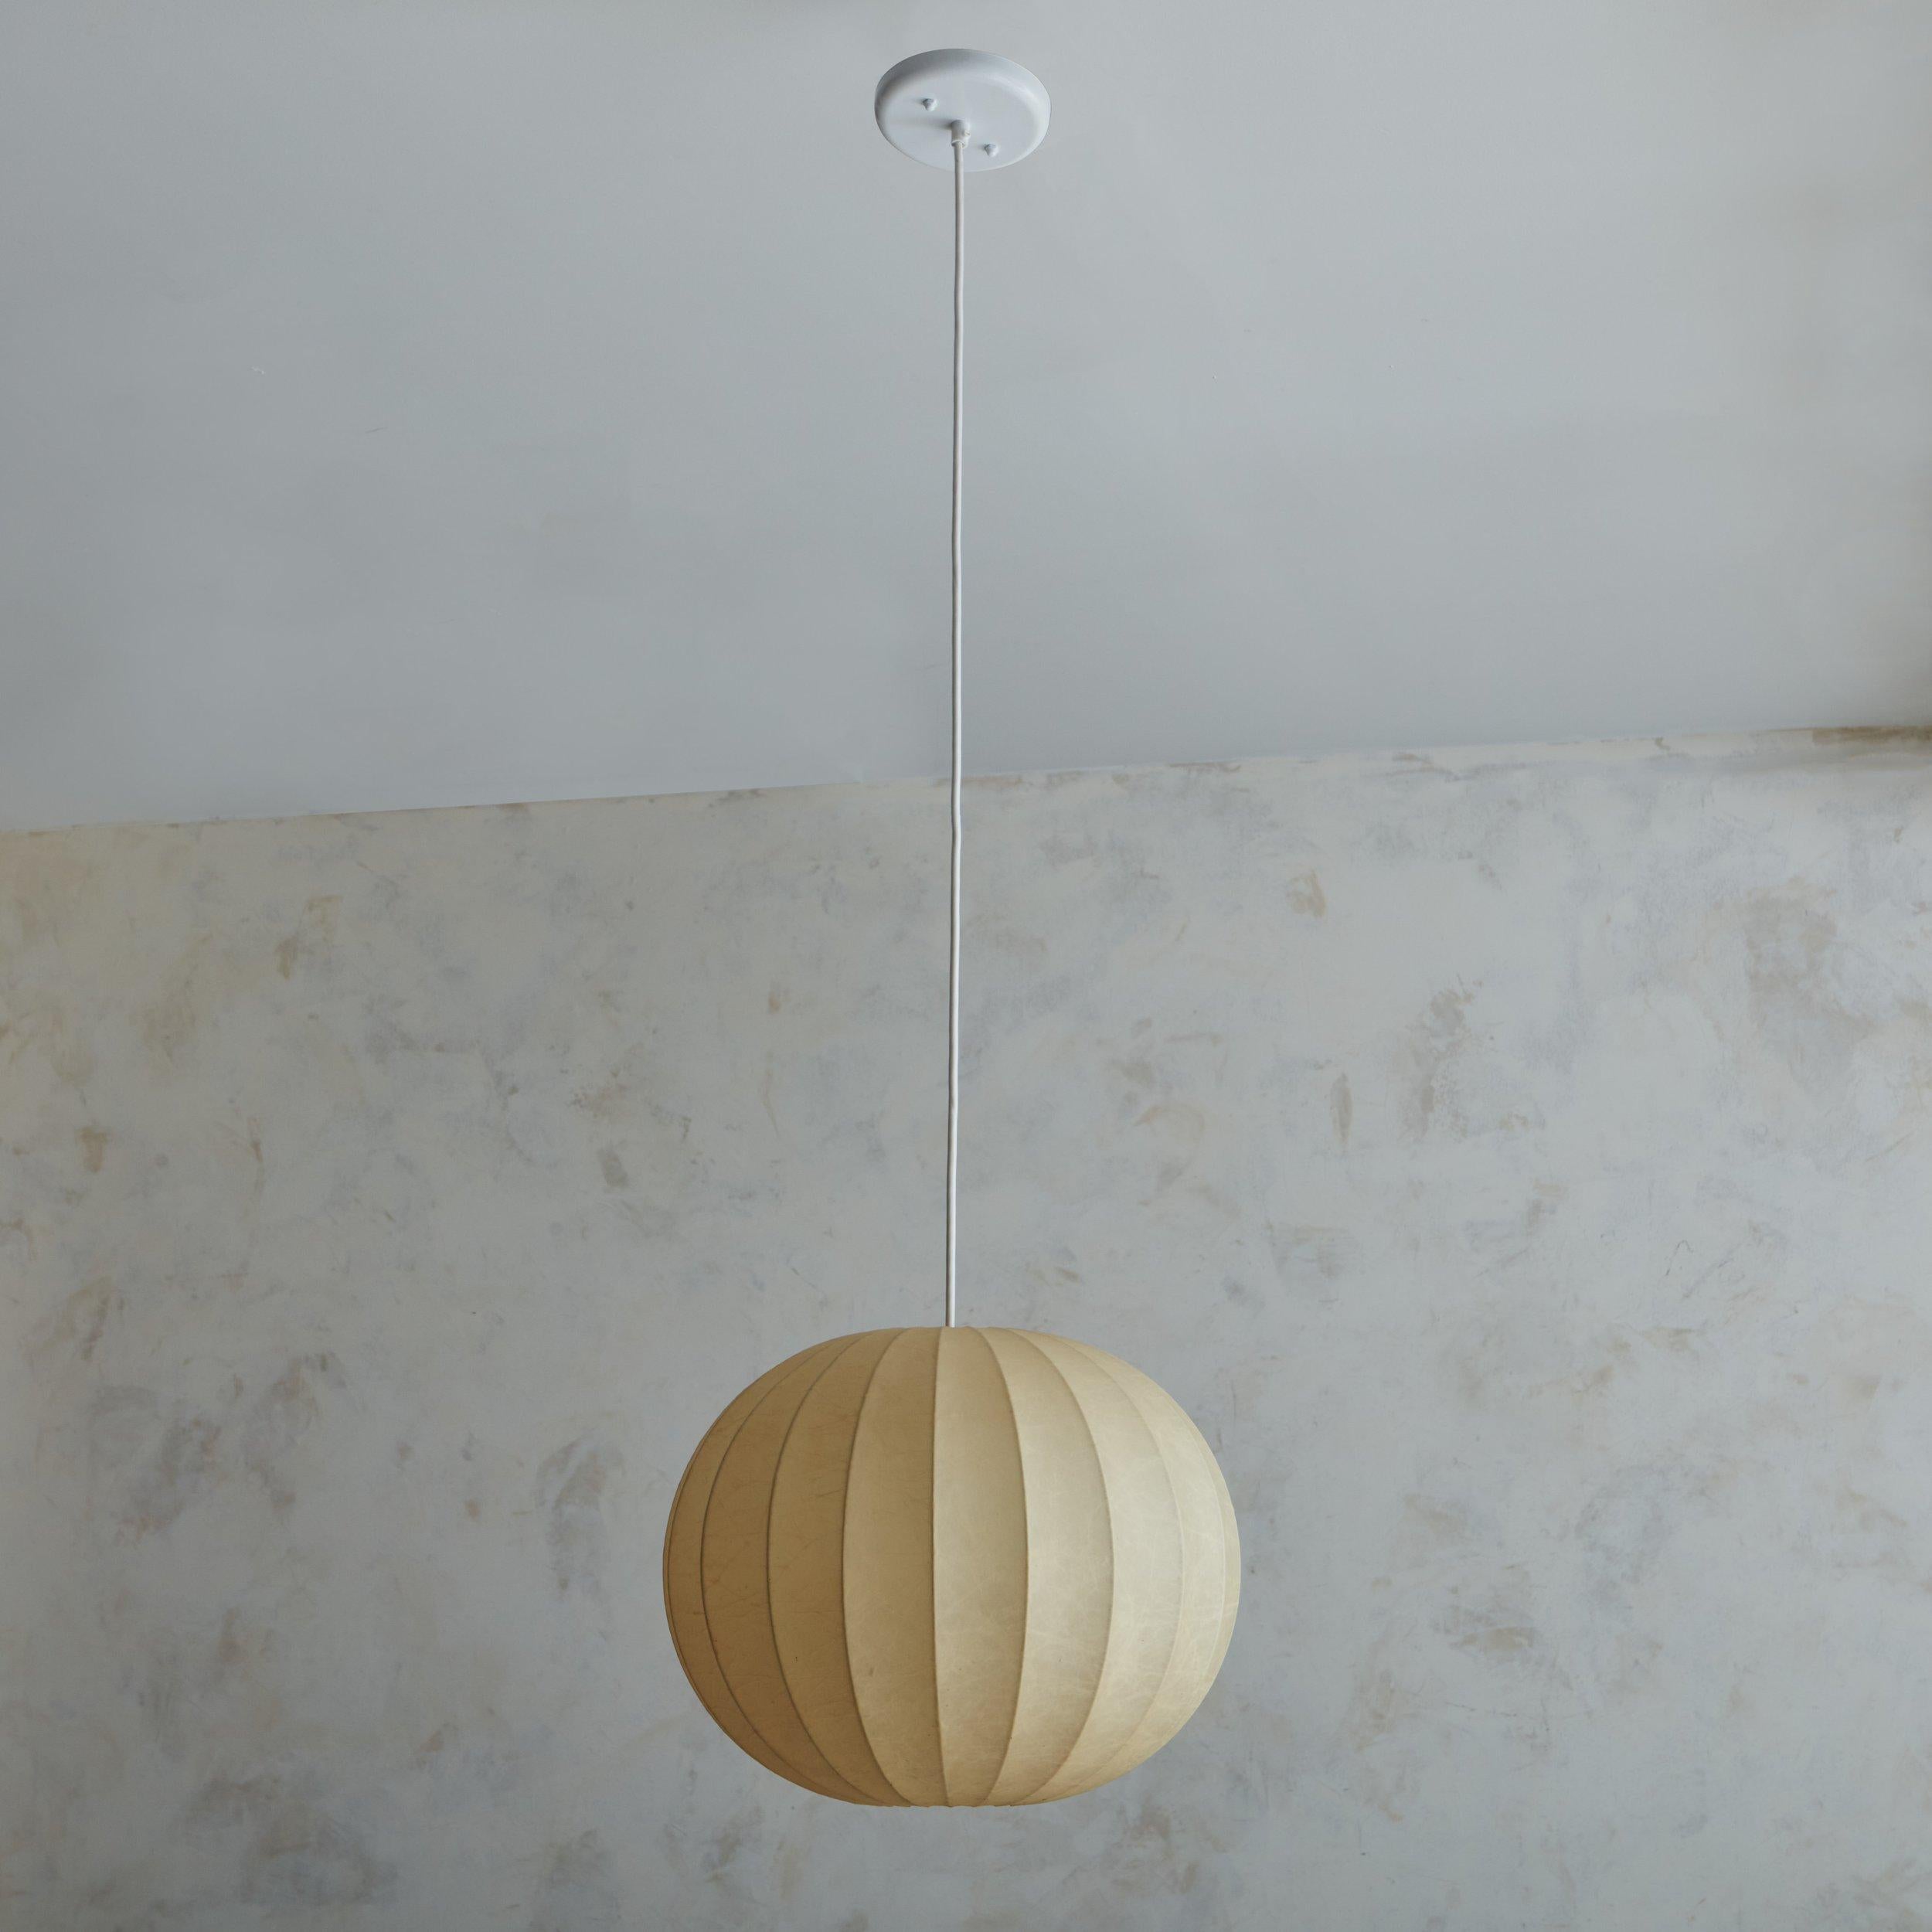 A vintage Italian cocoon pendant light featuring a metal frame with cream resin shade. This pendant has a cylindrical globe shape with curved channels and a new white metal canopy. When lit, it emanates a warm glow. Unmarked. Sourced in Italy, 20th